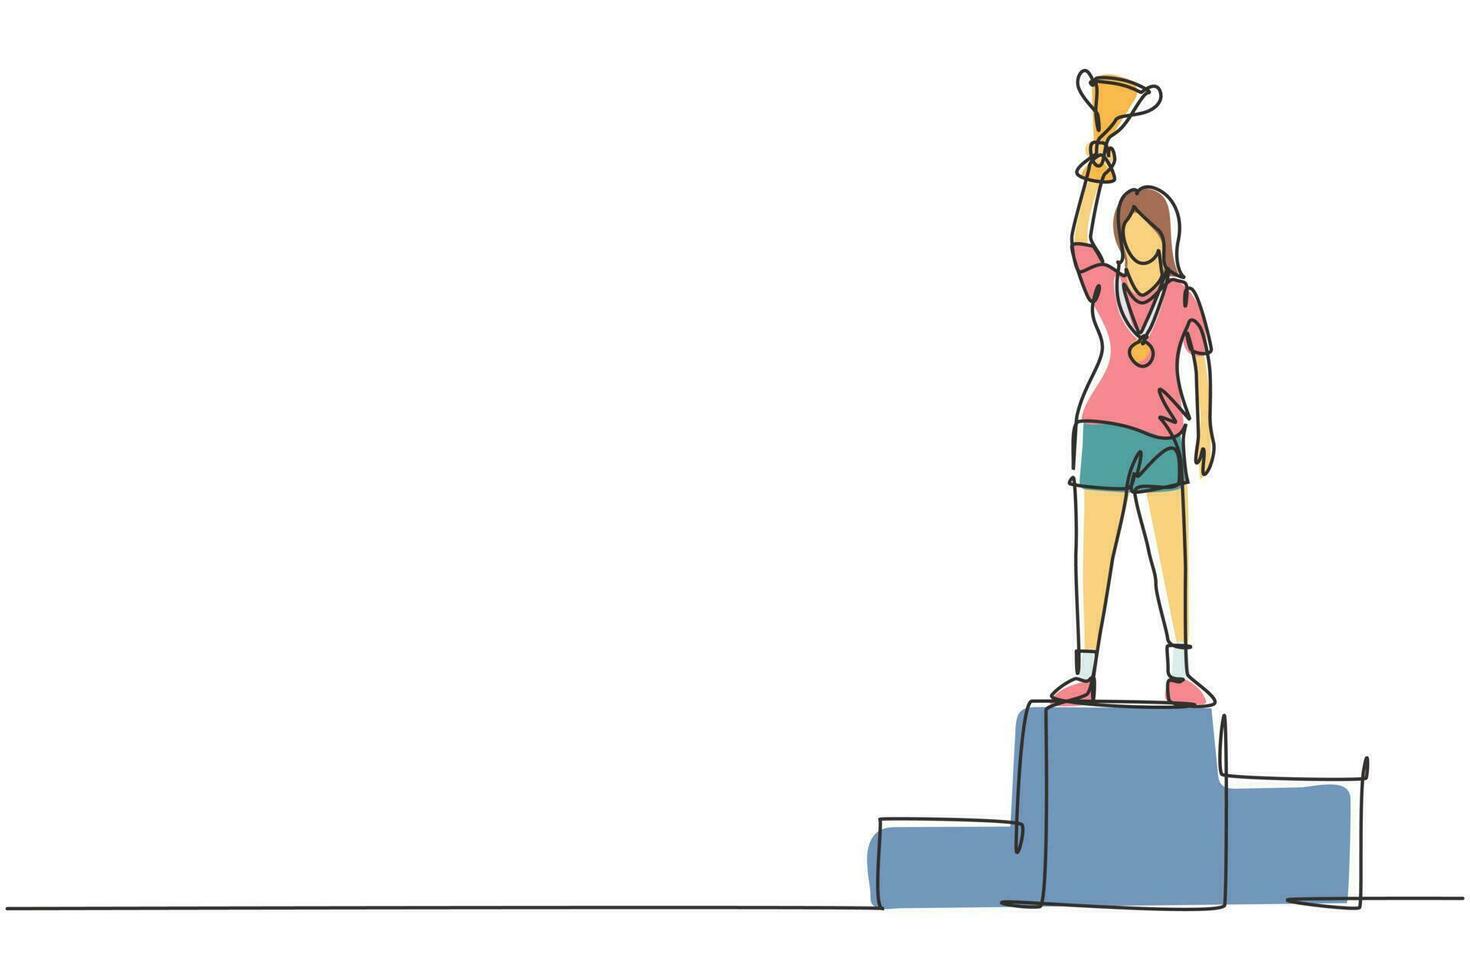 Single one line drawing female athlete wearing sports jersey lifting golden trophy with one hand on podium. Celebrating victory of competition. Continuous line draw design graphic vector illustration